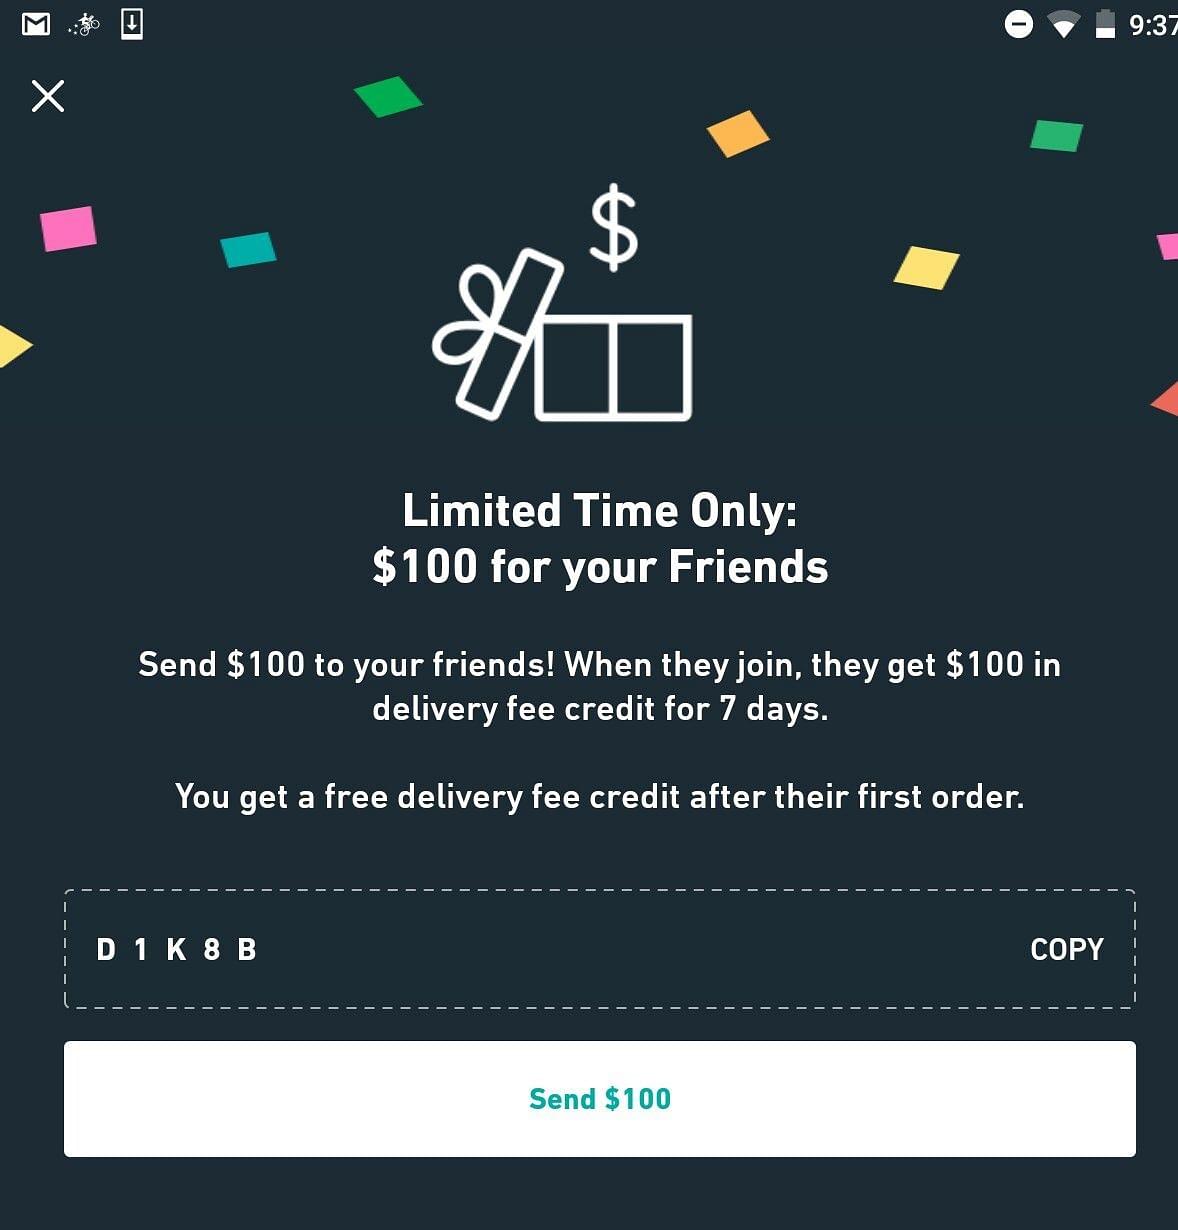 Postmates Promo Codes Reddit Save Up To 5 + 100 Delivery Credits